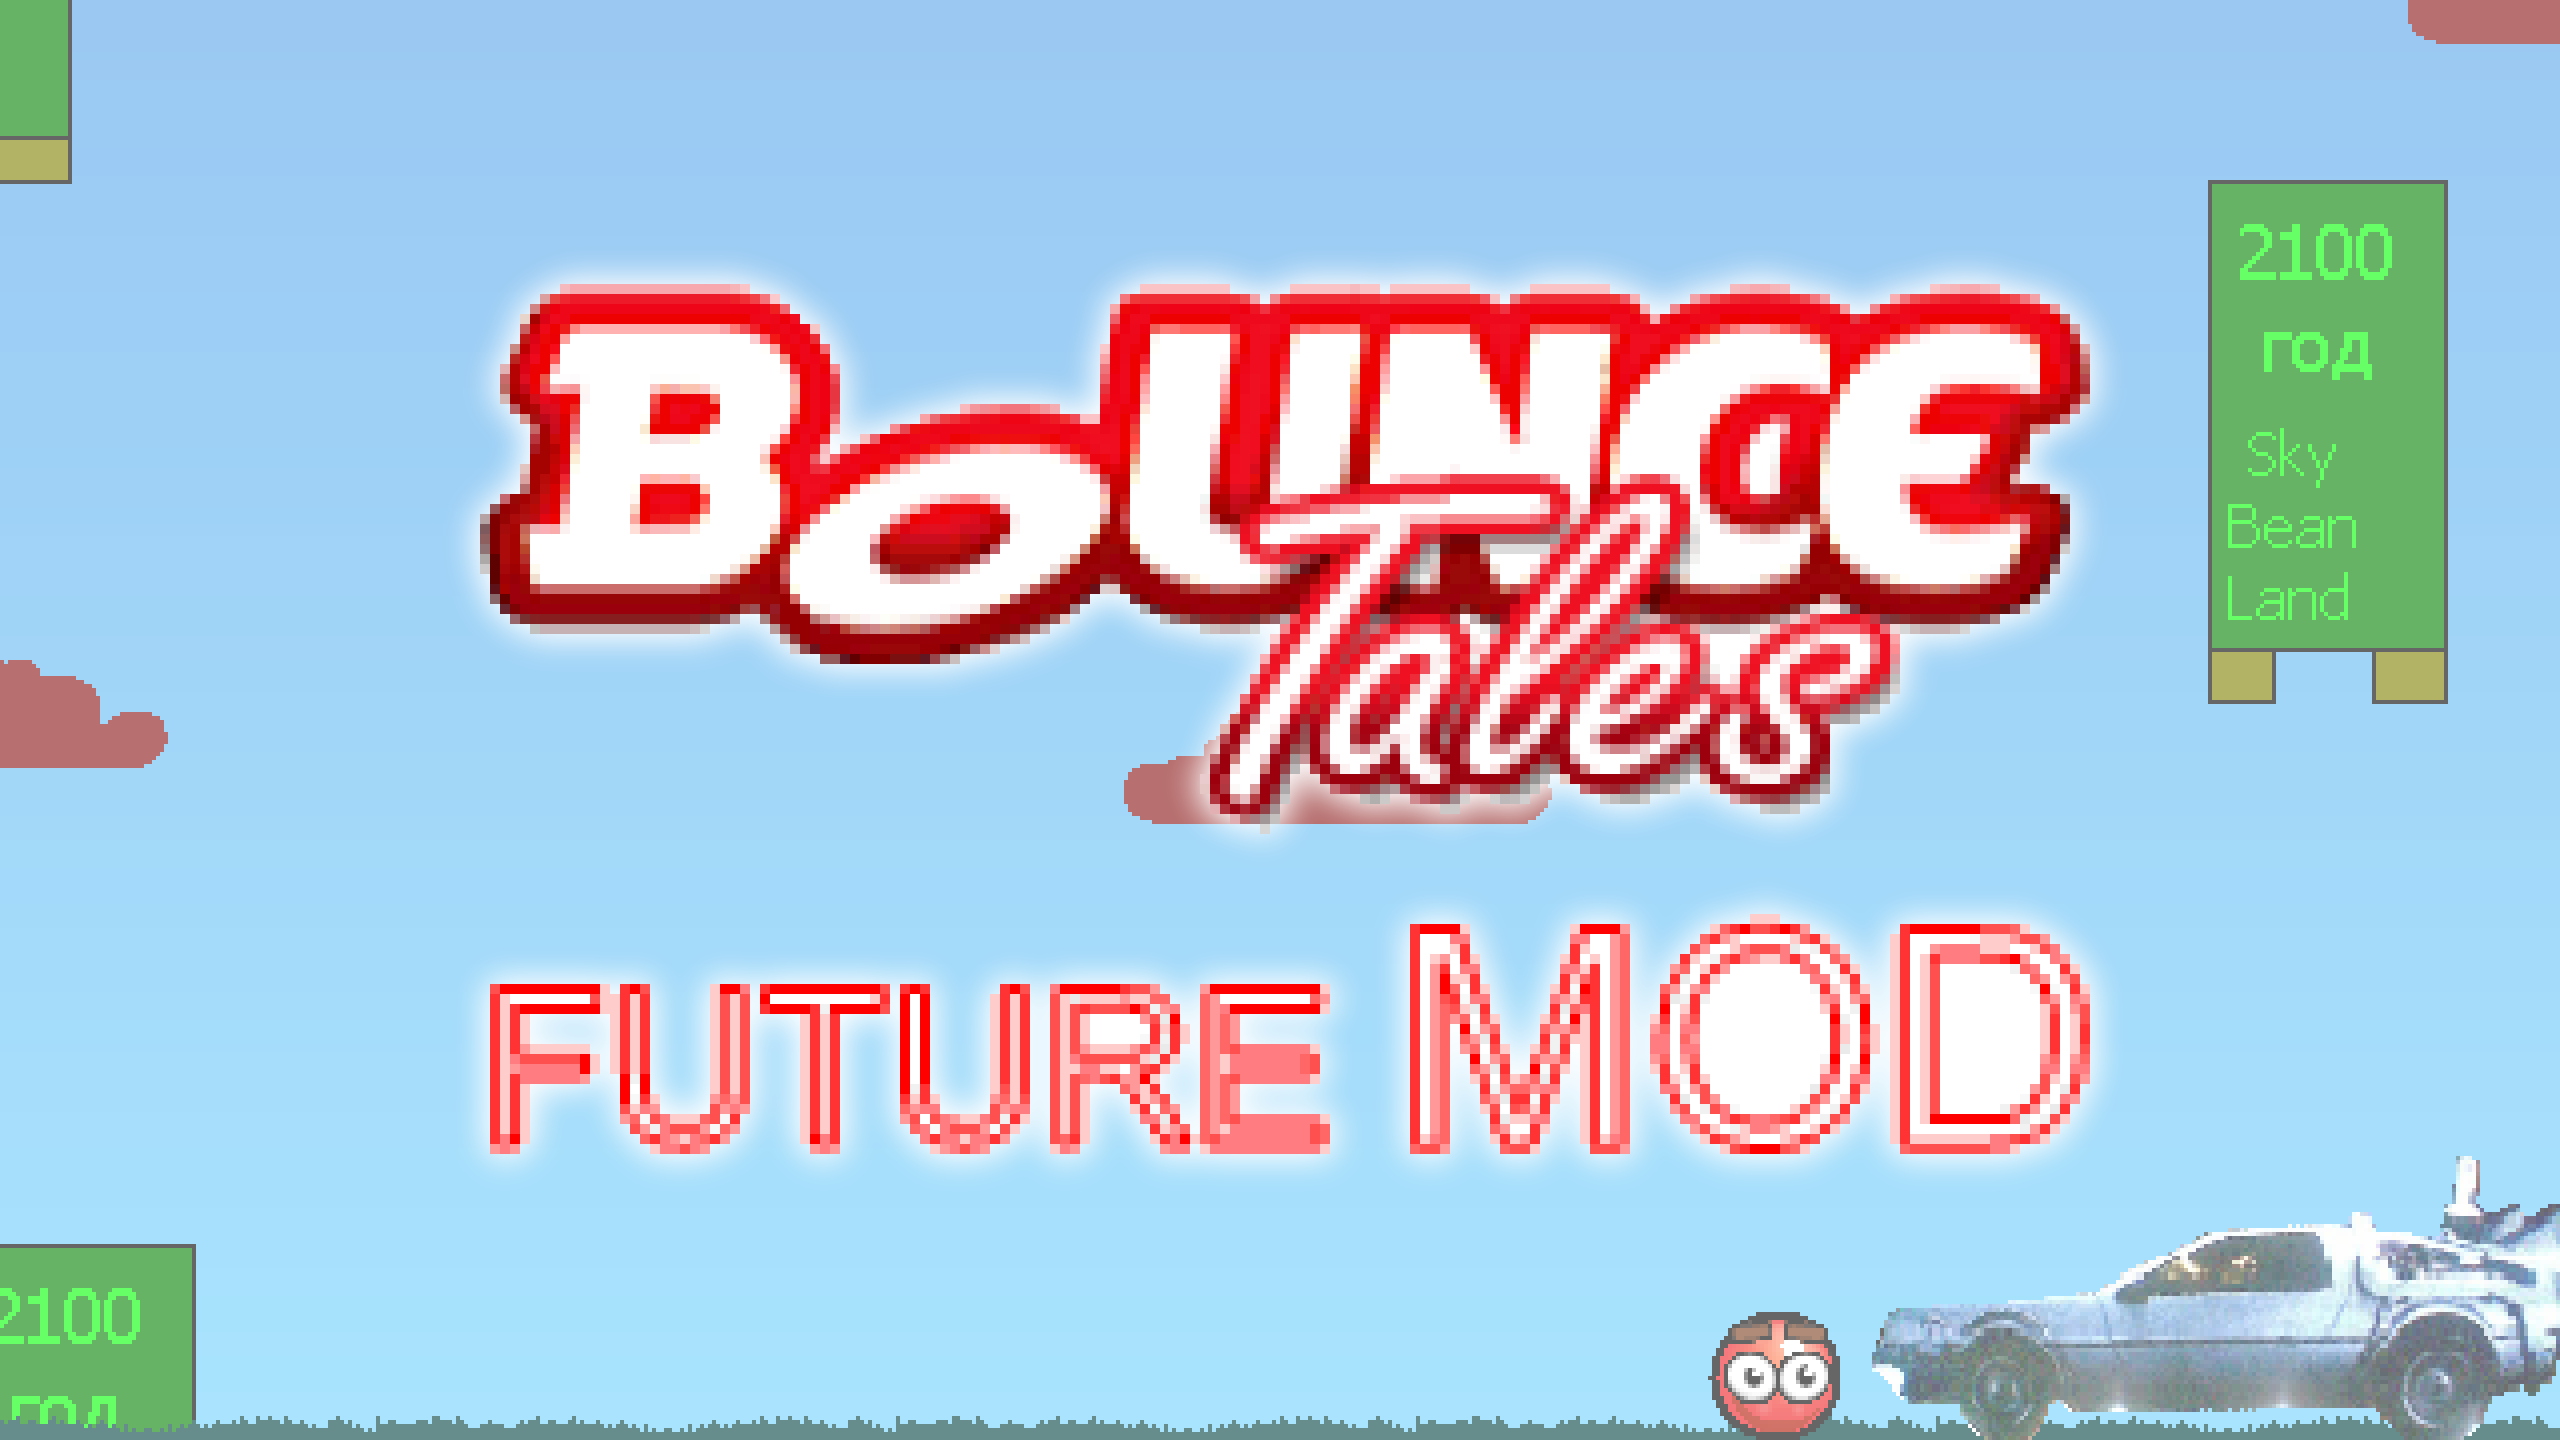 Bounce tales adventures